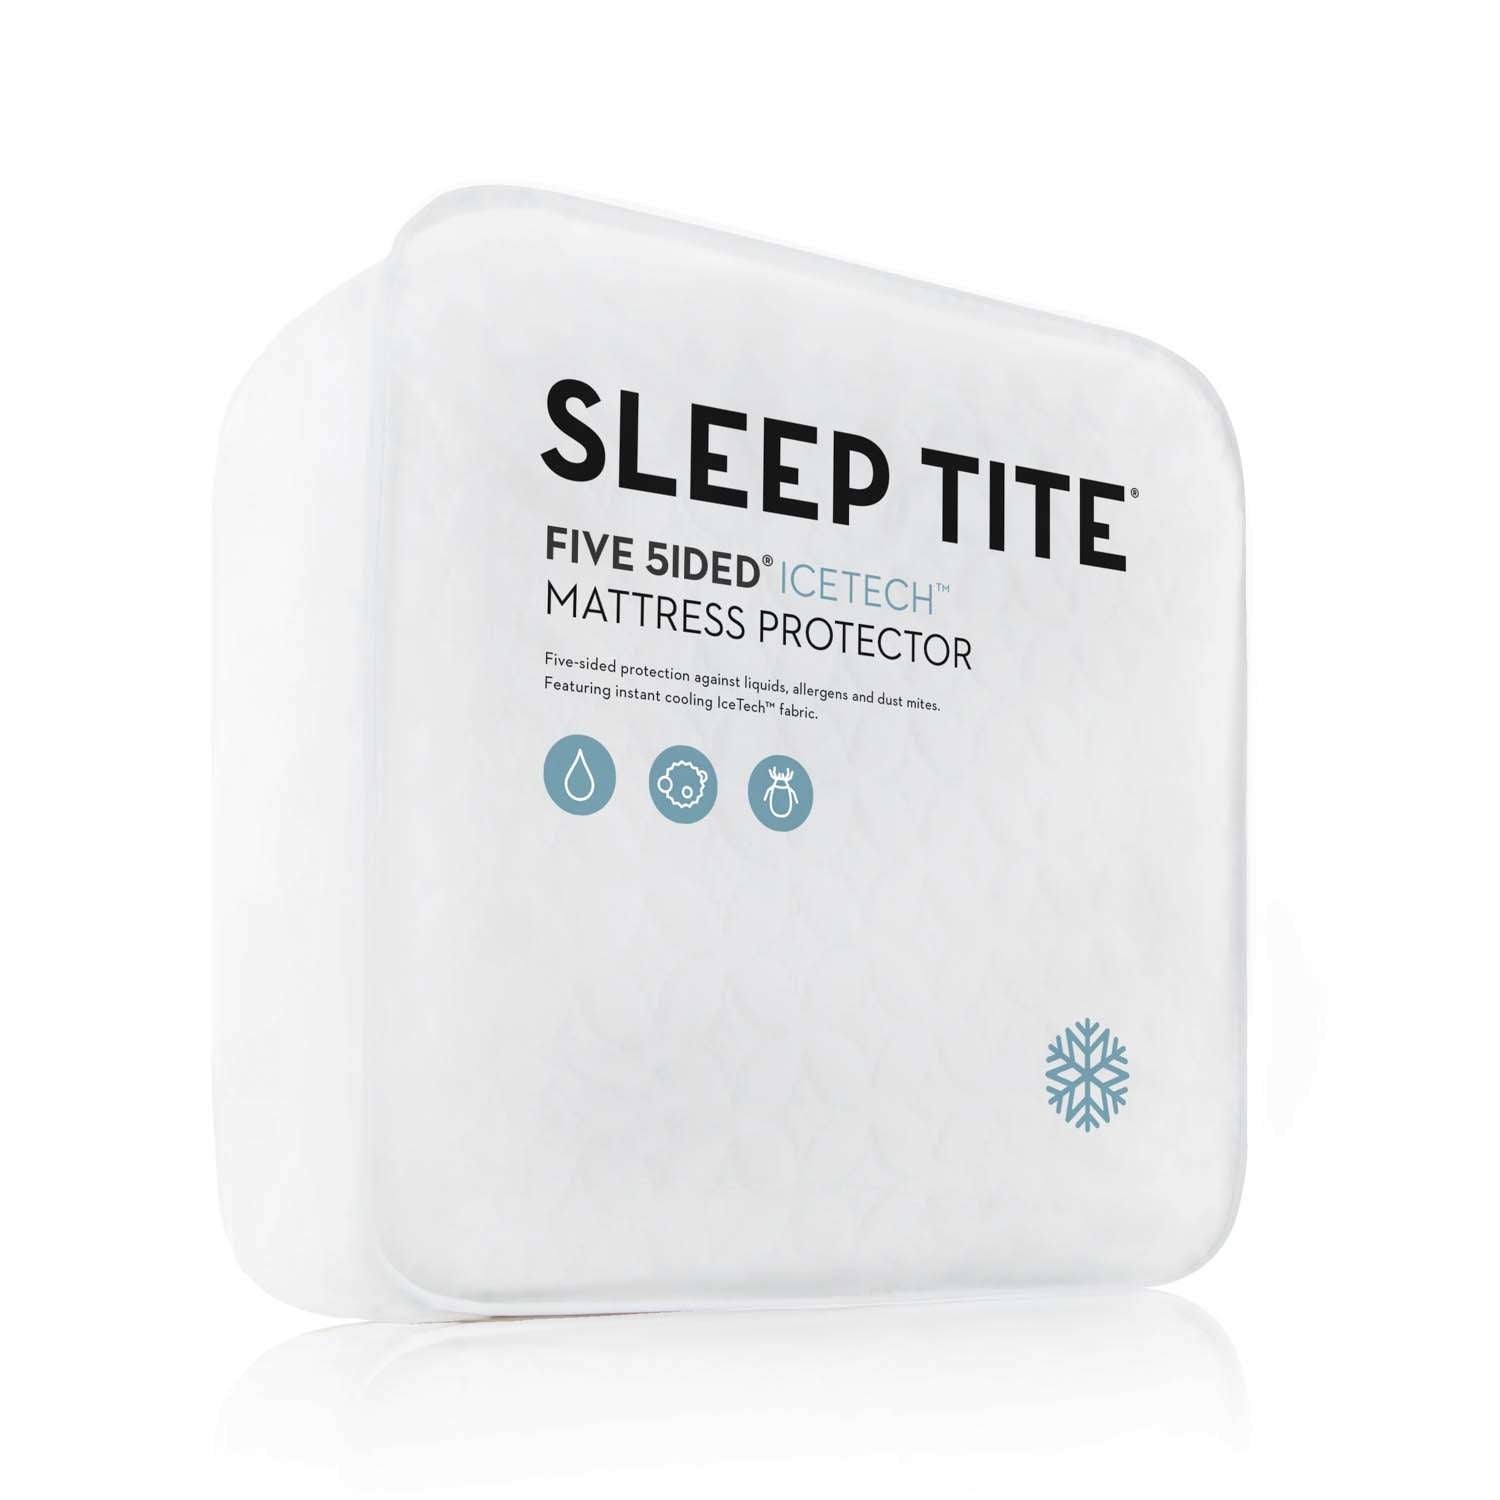 Five 5ided IceTech Mattress Protector Twin XL